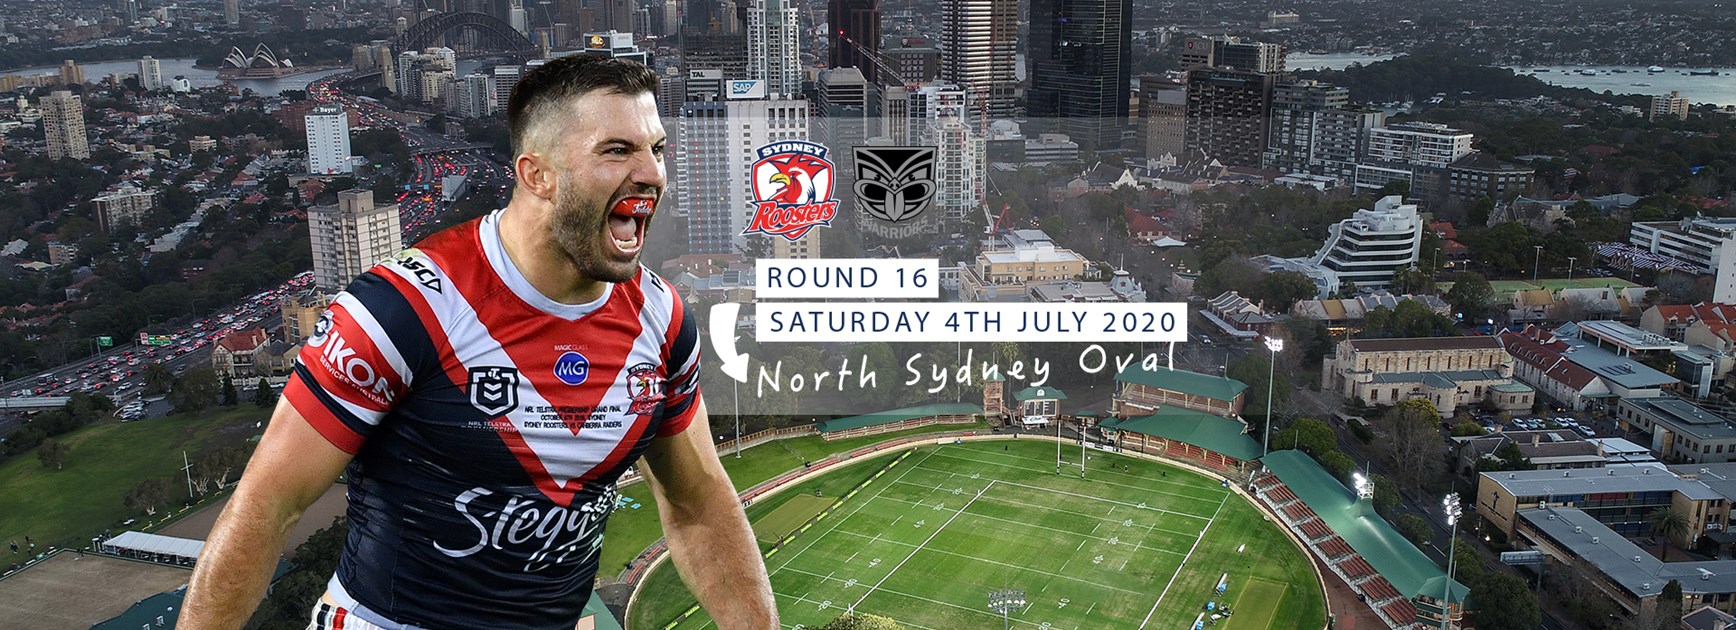 Roosters Round 16 home game relocated to North Sydney Oval